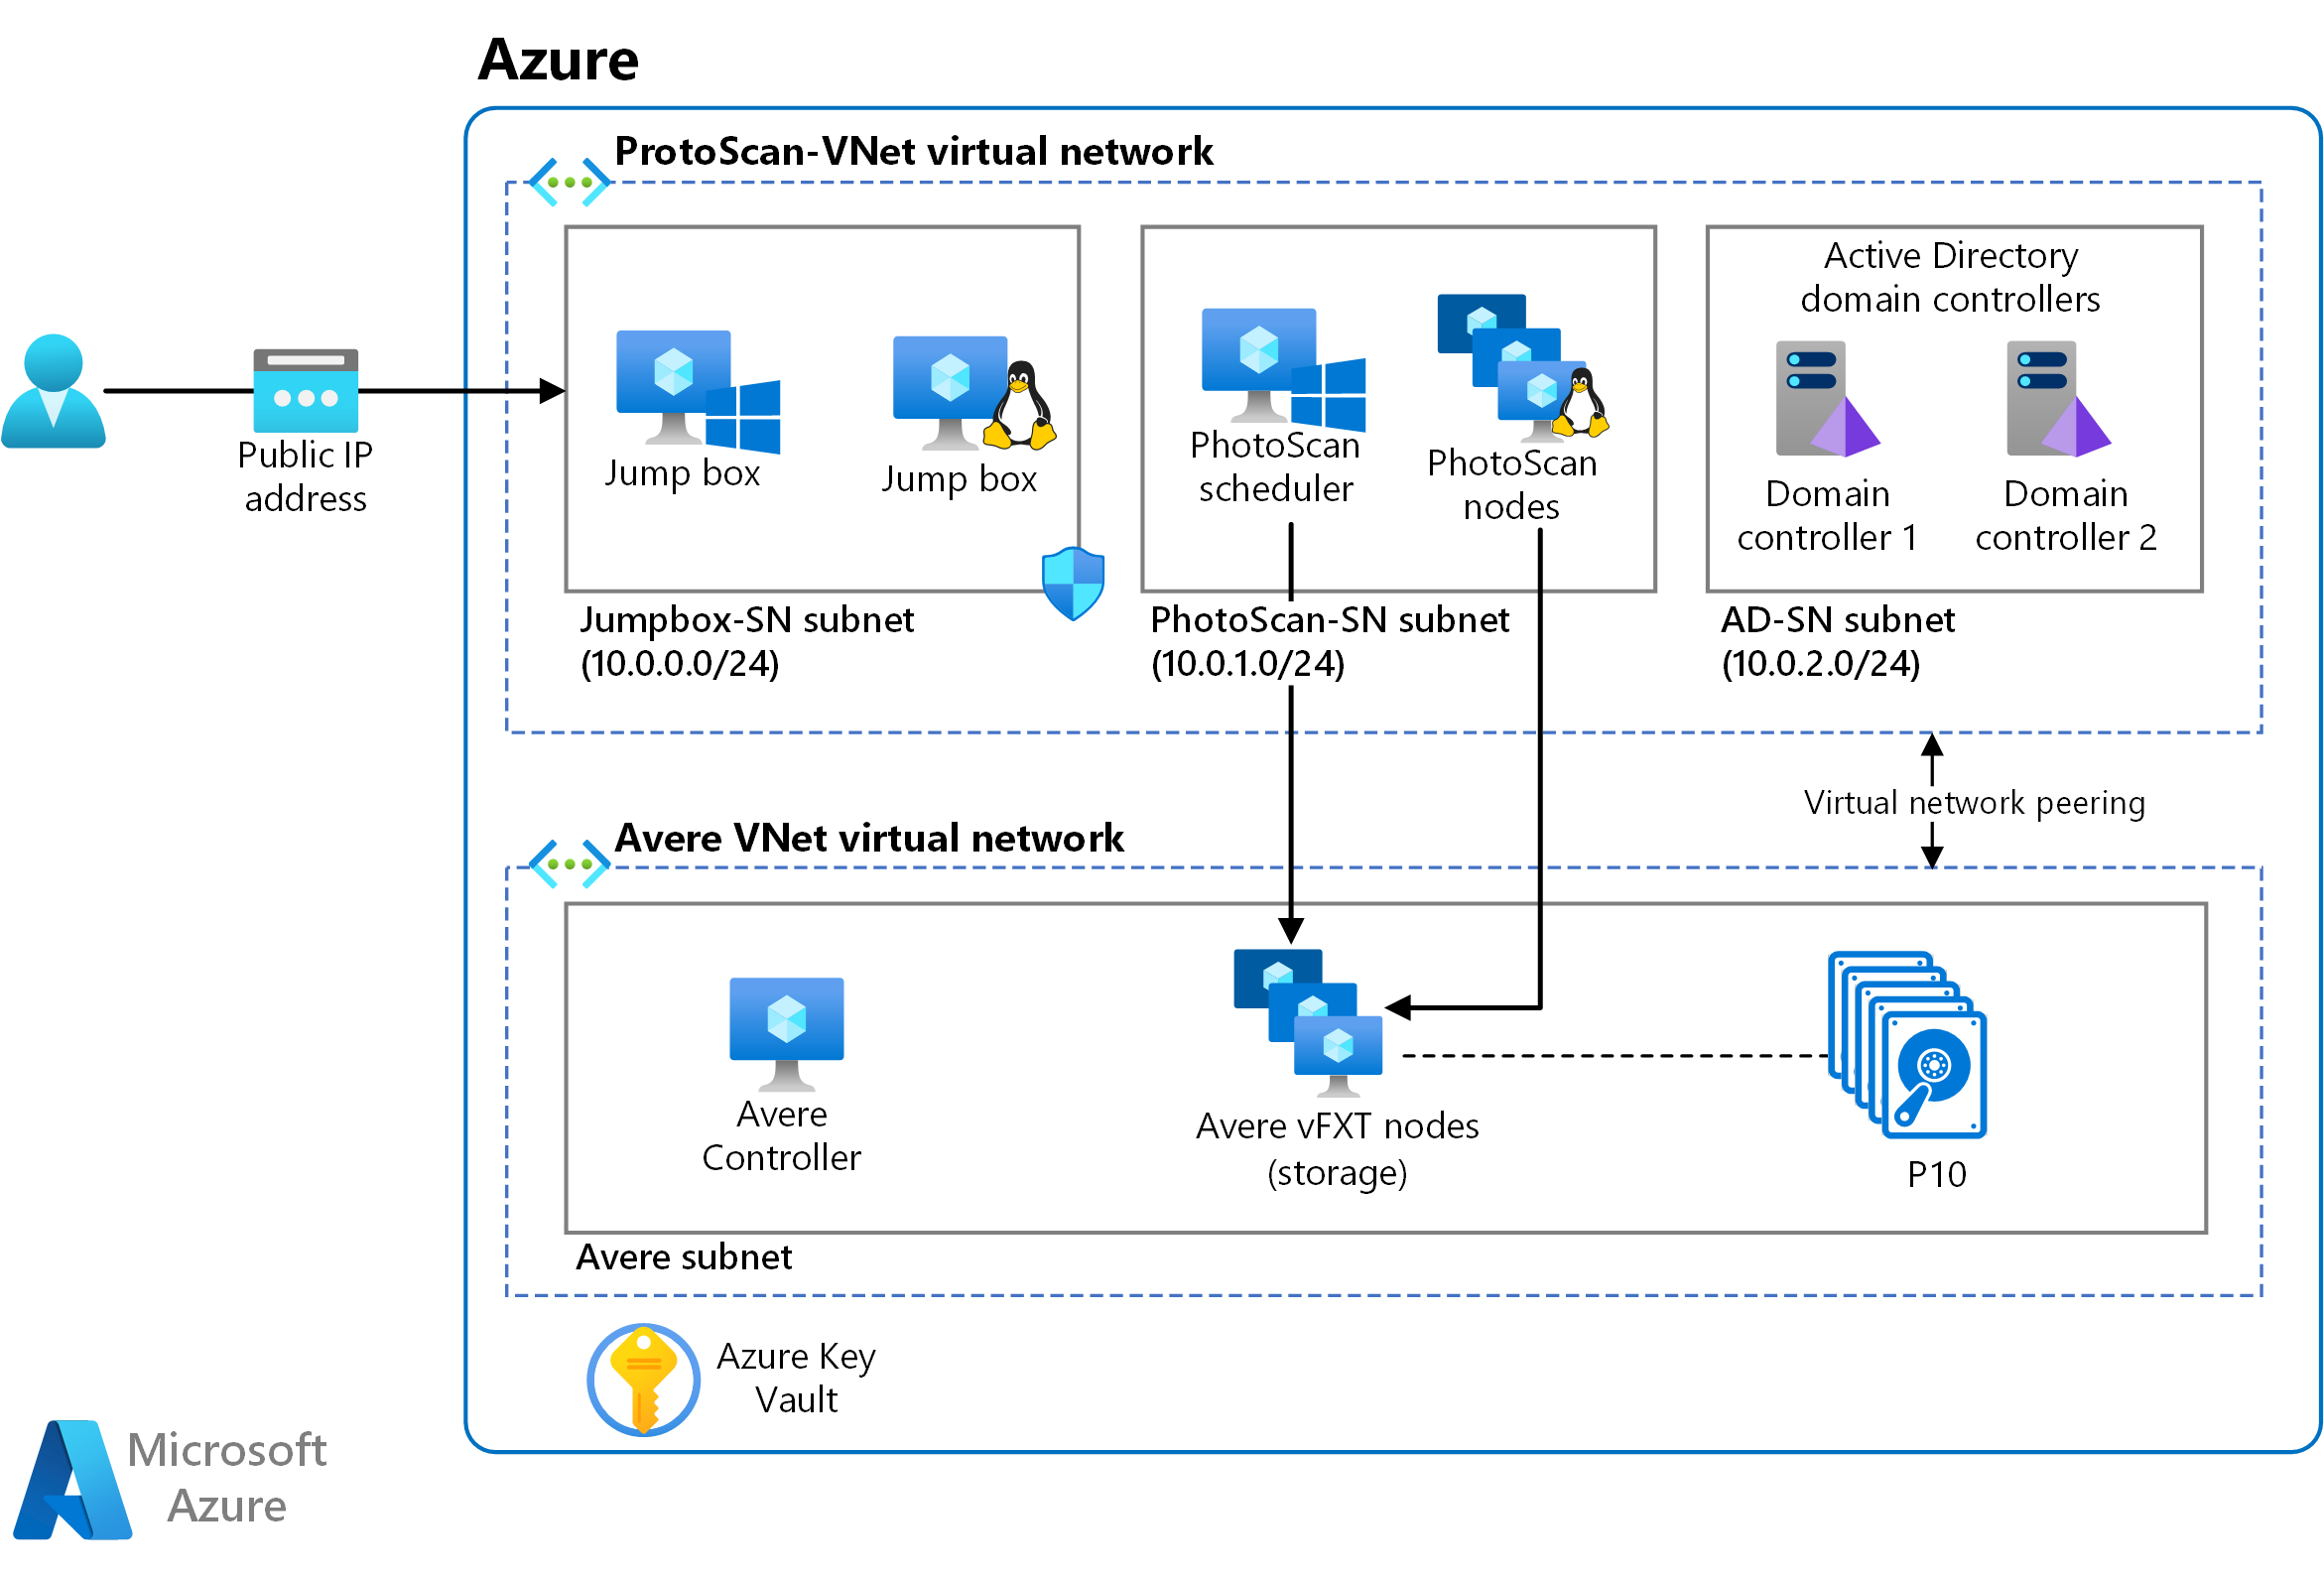 Diagram showing architecture of image-based modeling using Agisoft PhotoScan backed by Avere vFXT storage, Active Directory domain controllers and jump boxes.